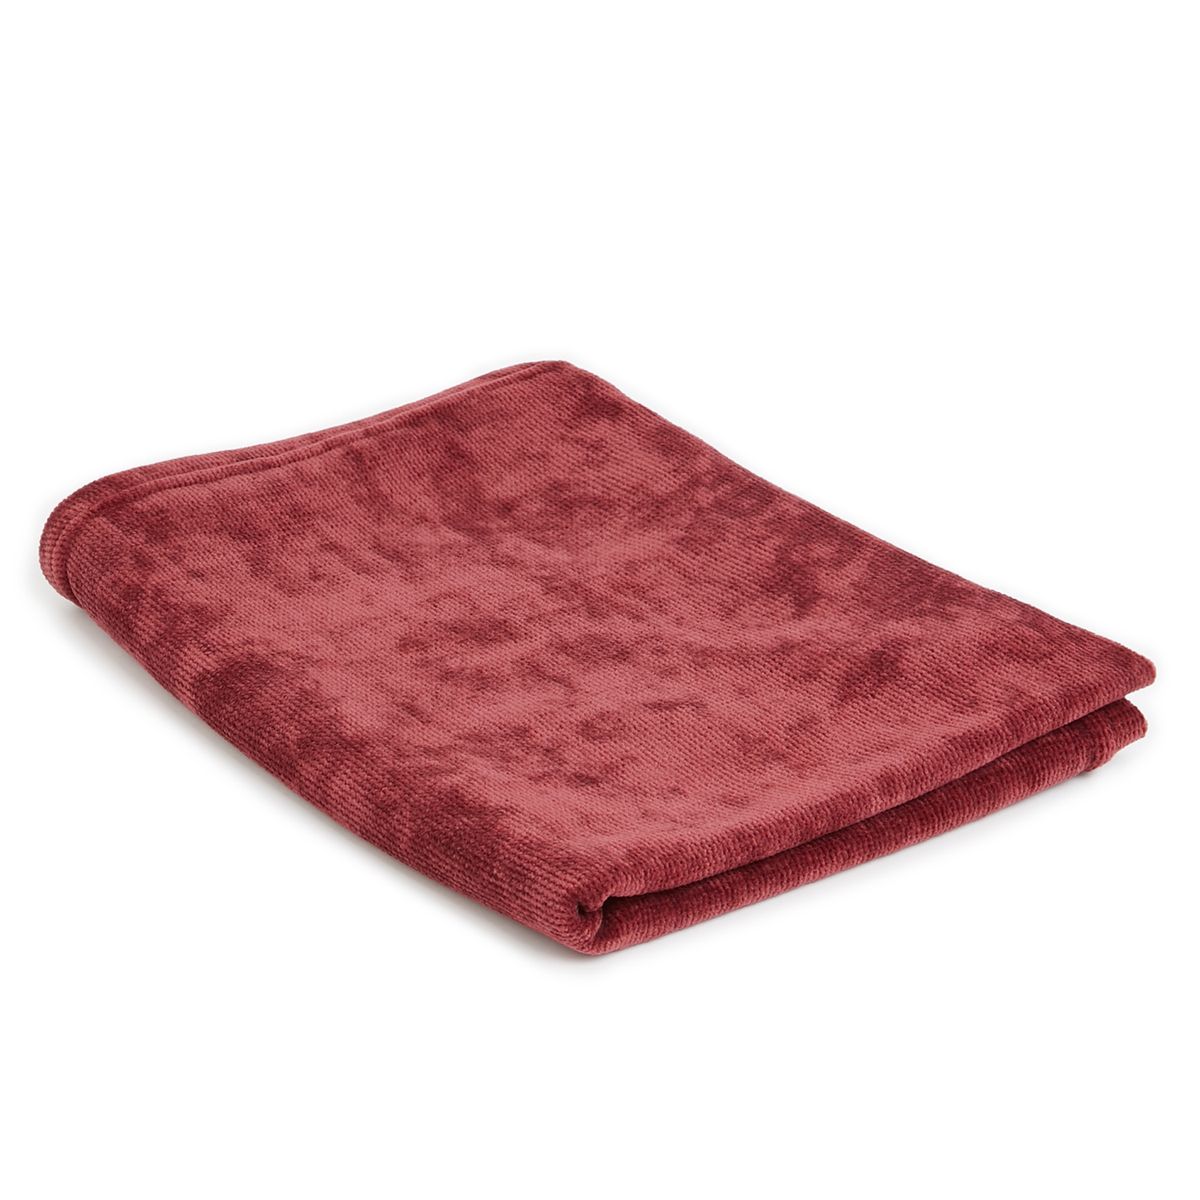 Wiggle Chenille Blanket | Shop Today. Get it Tomorrow! | takealot.com